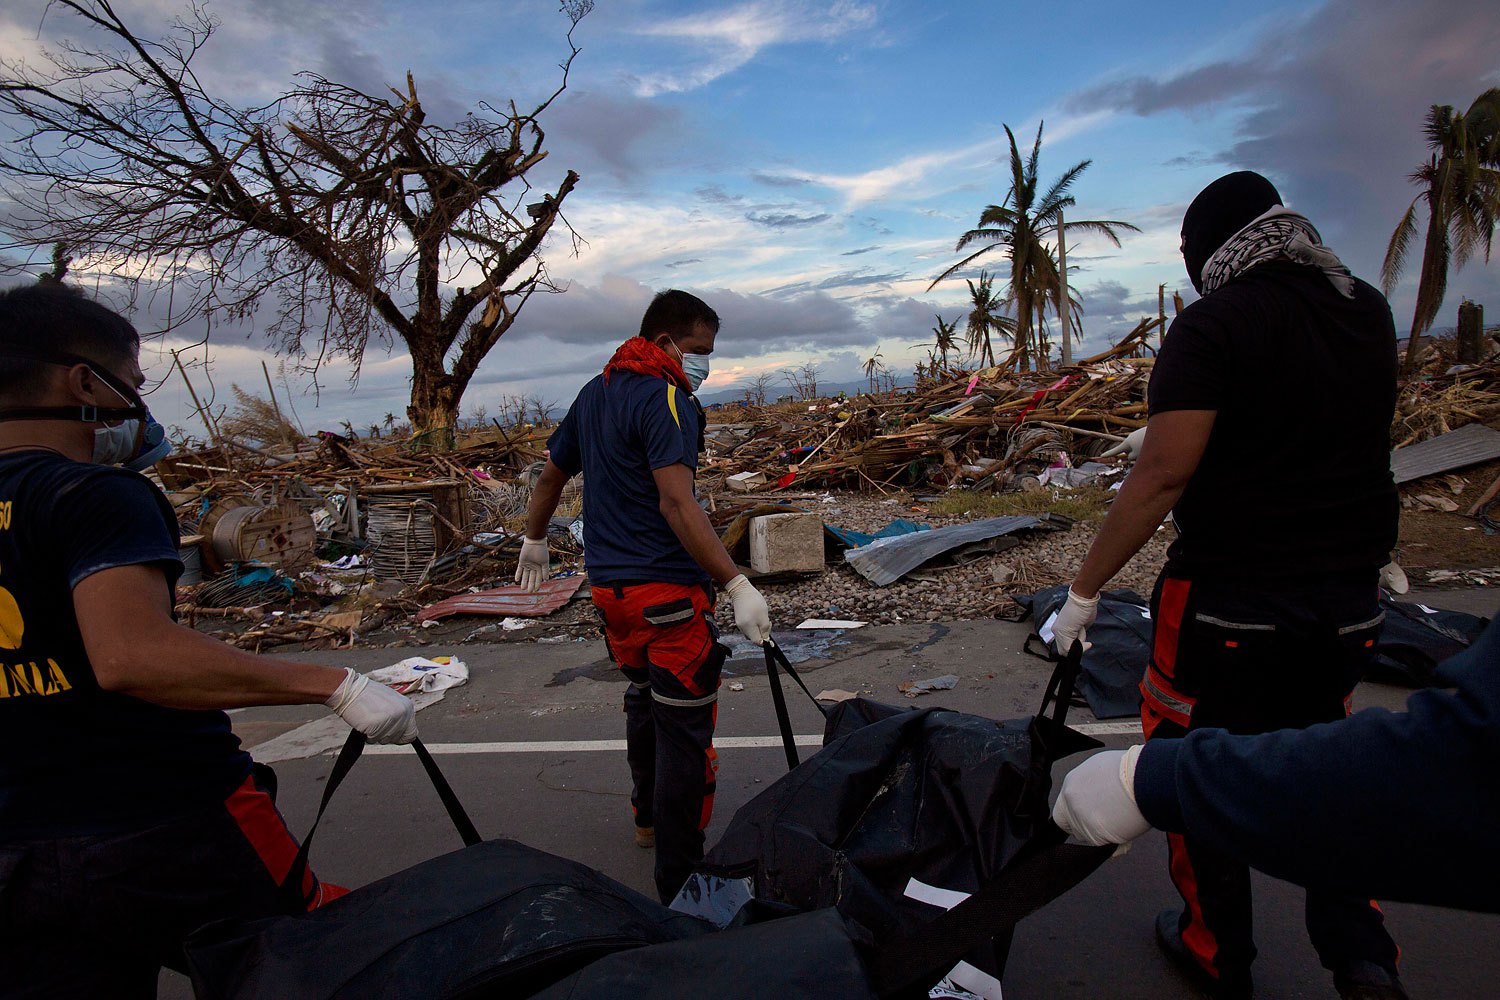 Members of a Philippines rescue team carry corpses in body bags as they search for the dead in the Typhoon Haiyan ravaged city of Tacloban on November 13, 2013.